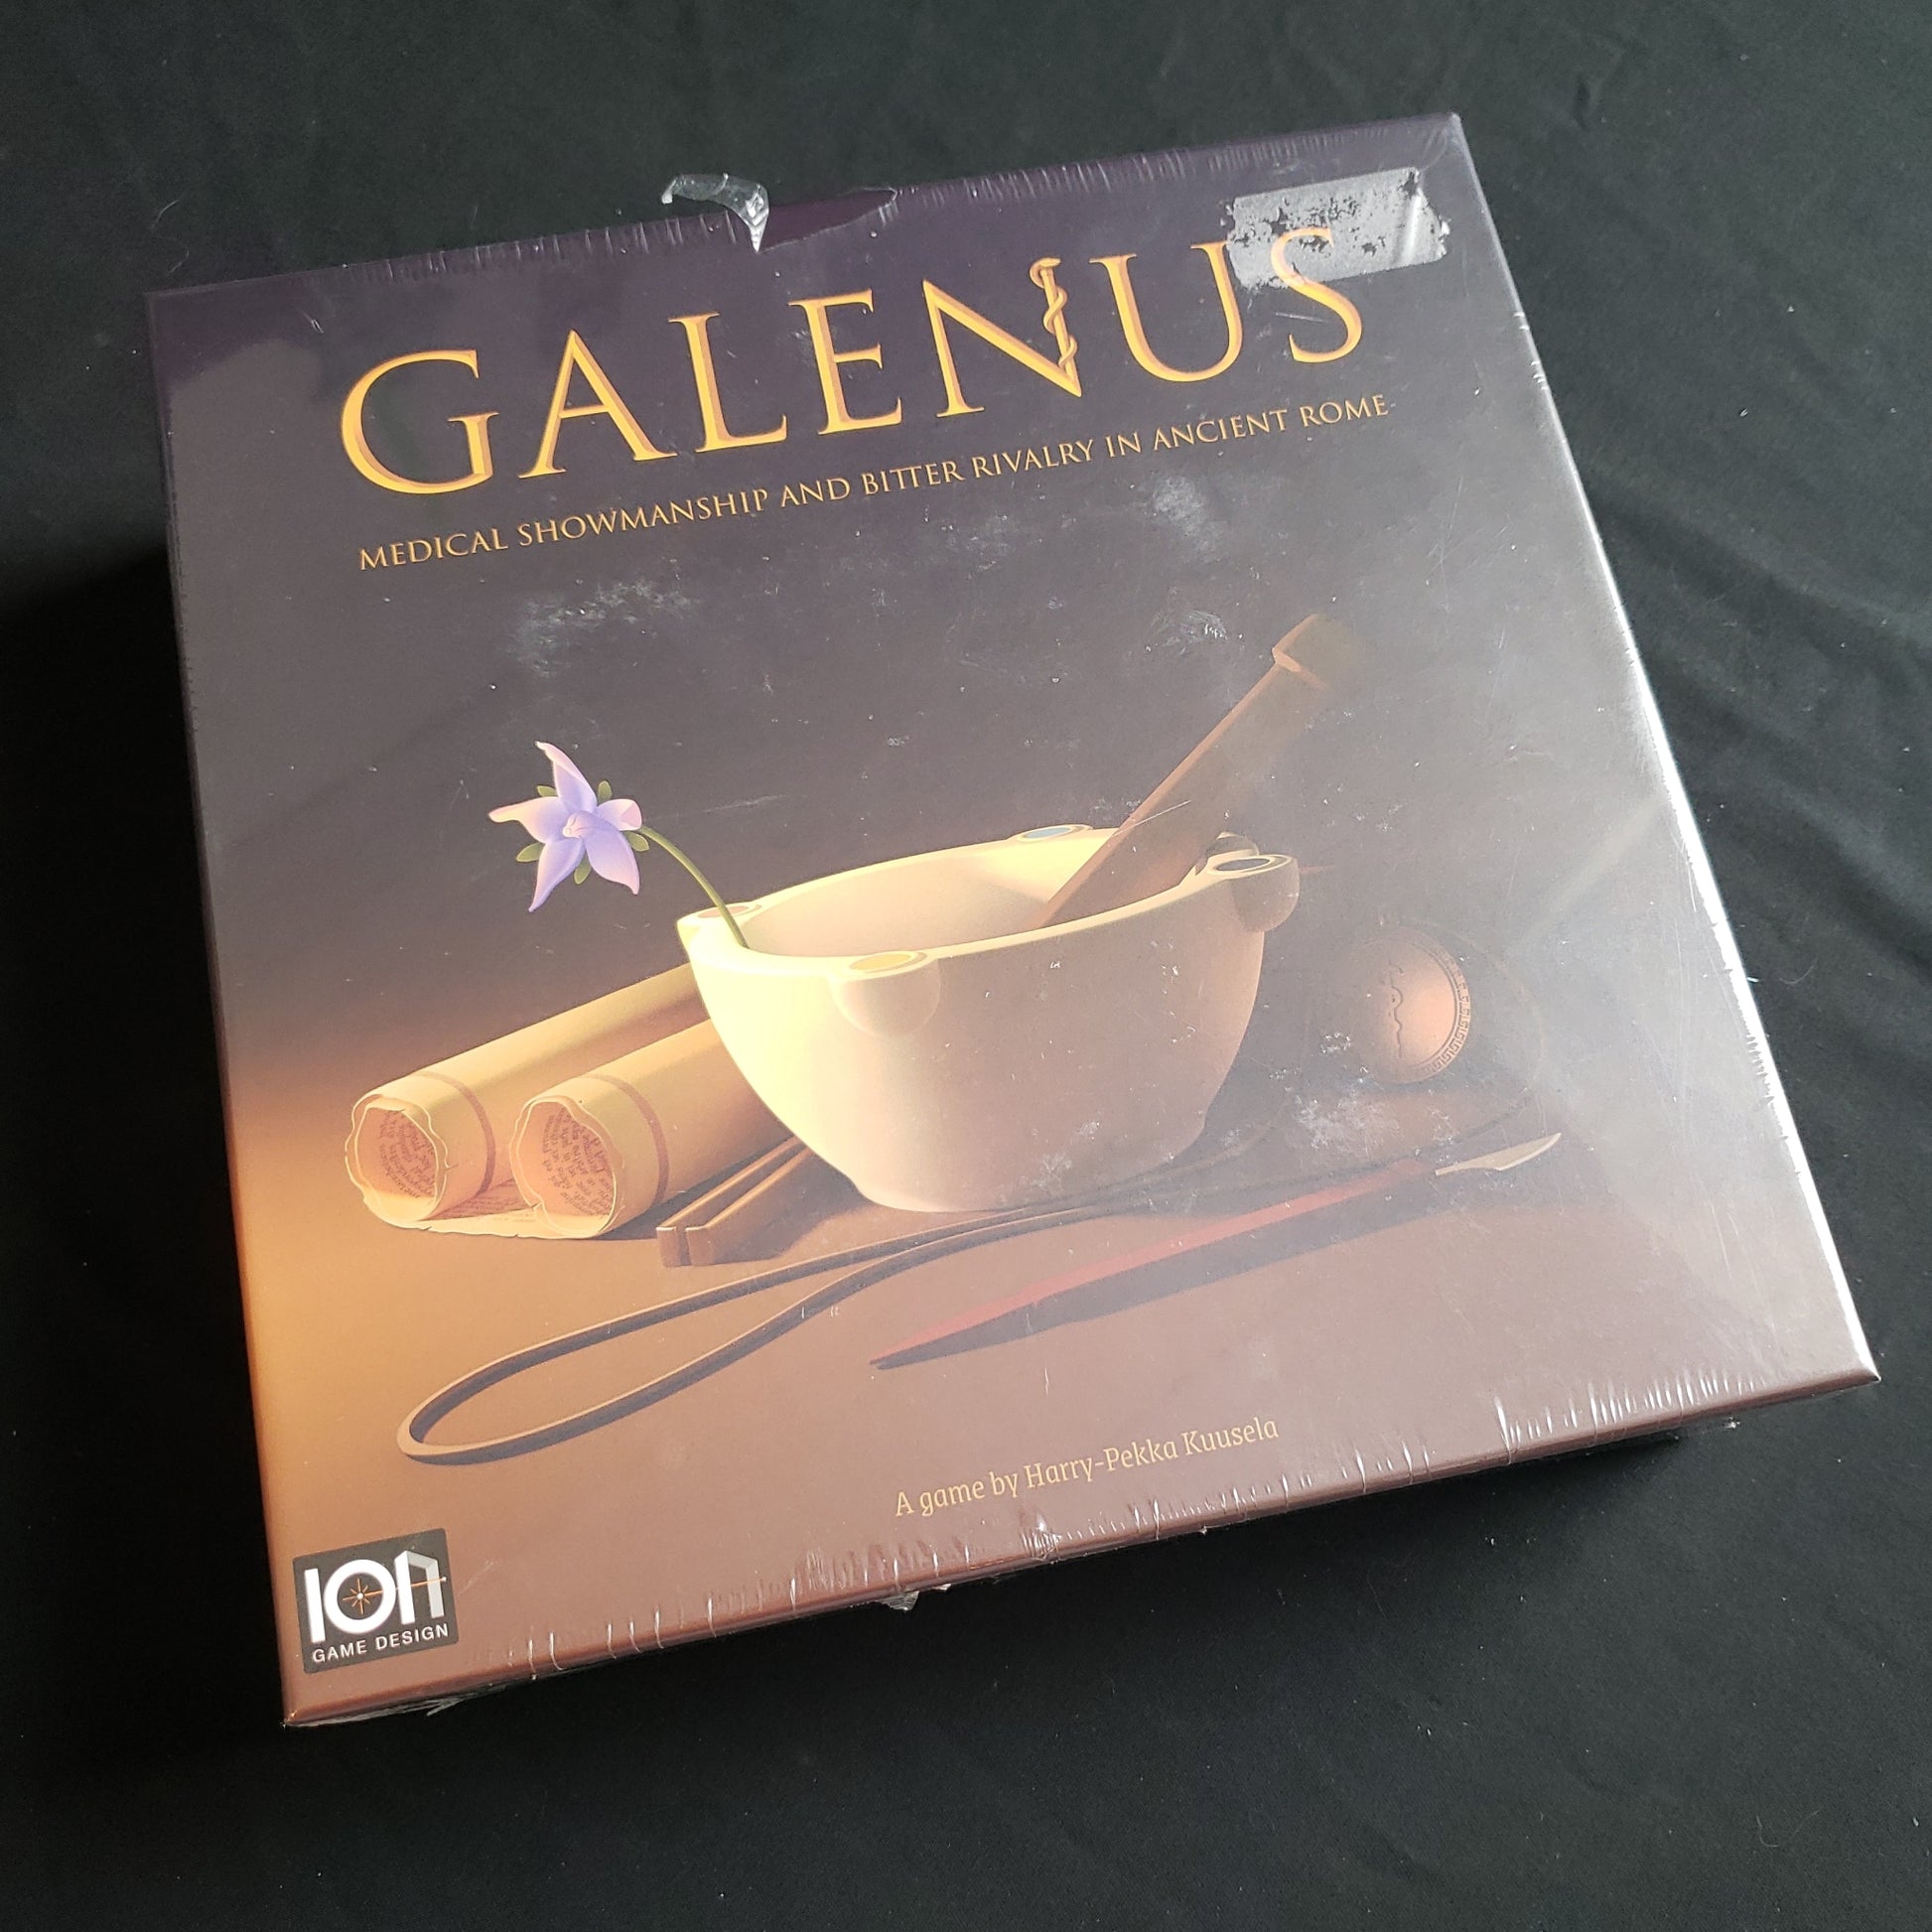 Image shows the front cover of the box of the Galenus board game